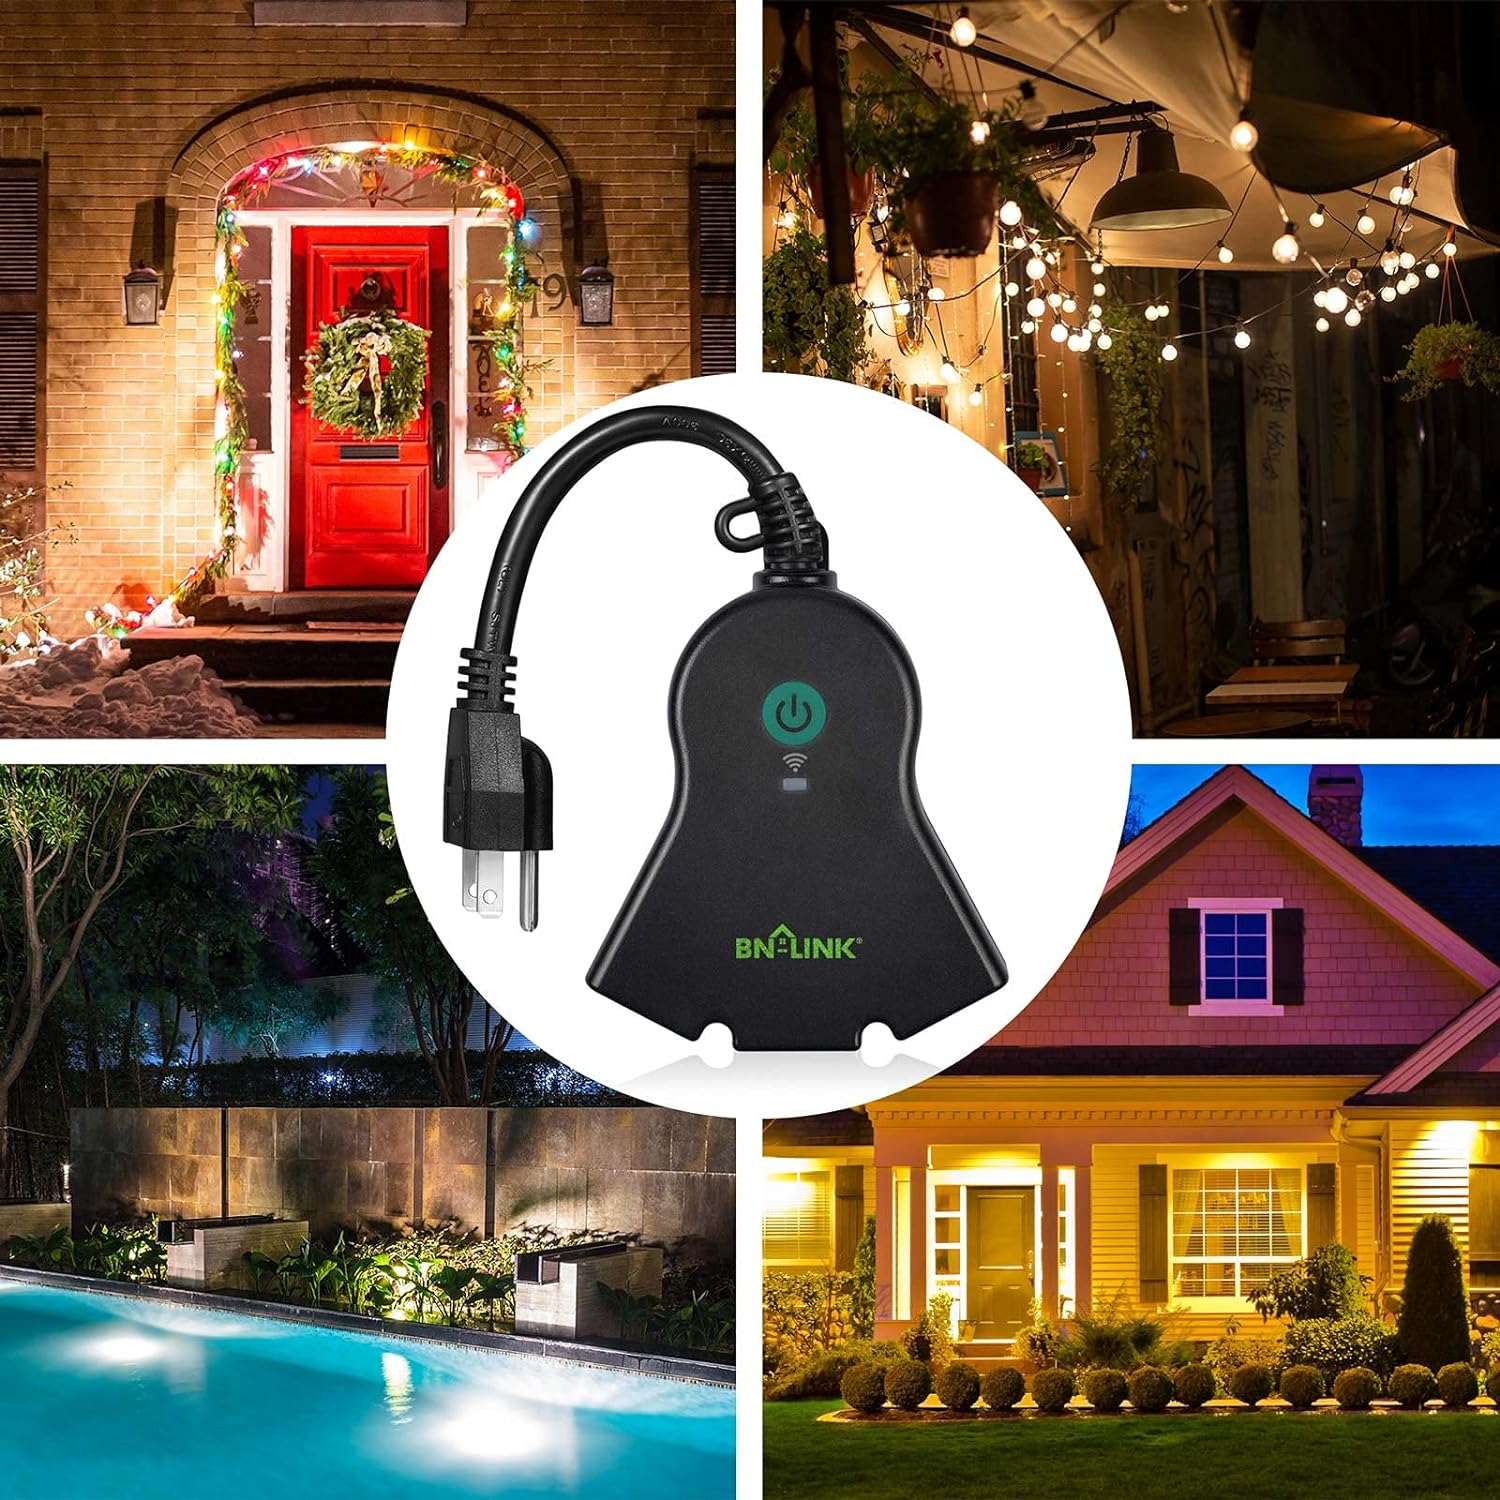 Outdoor Smart Wi-Fi Plug Outlet with 3 Sockets Compatible Function BN-LINK - BN-LINK